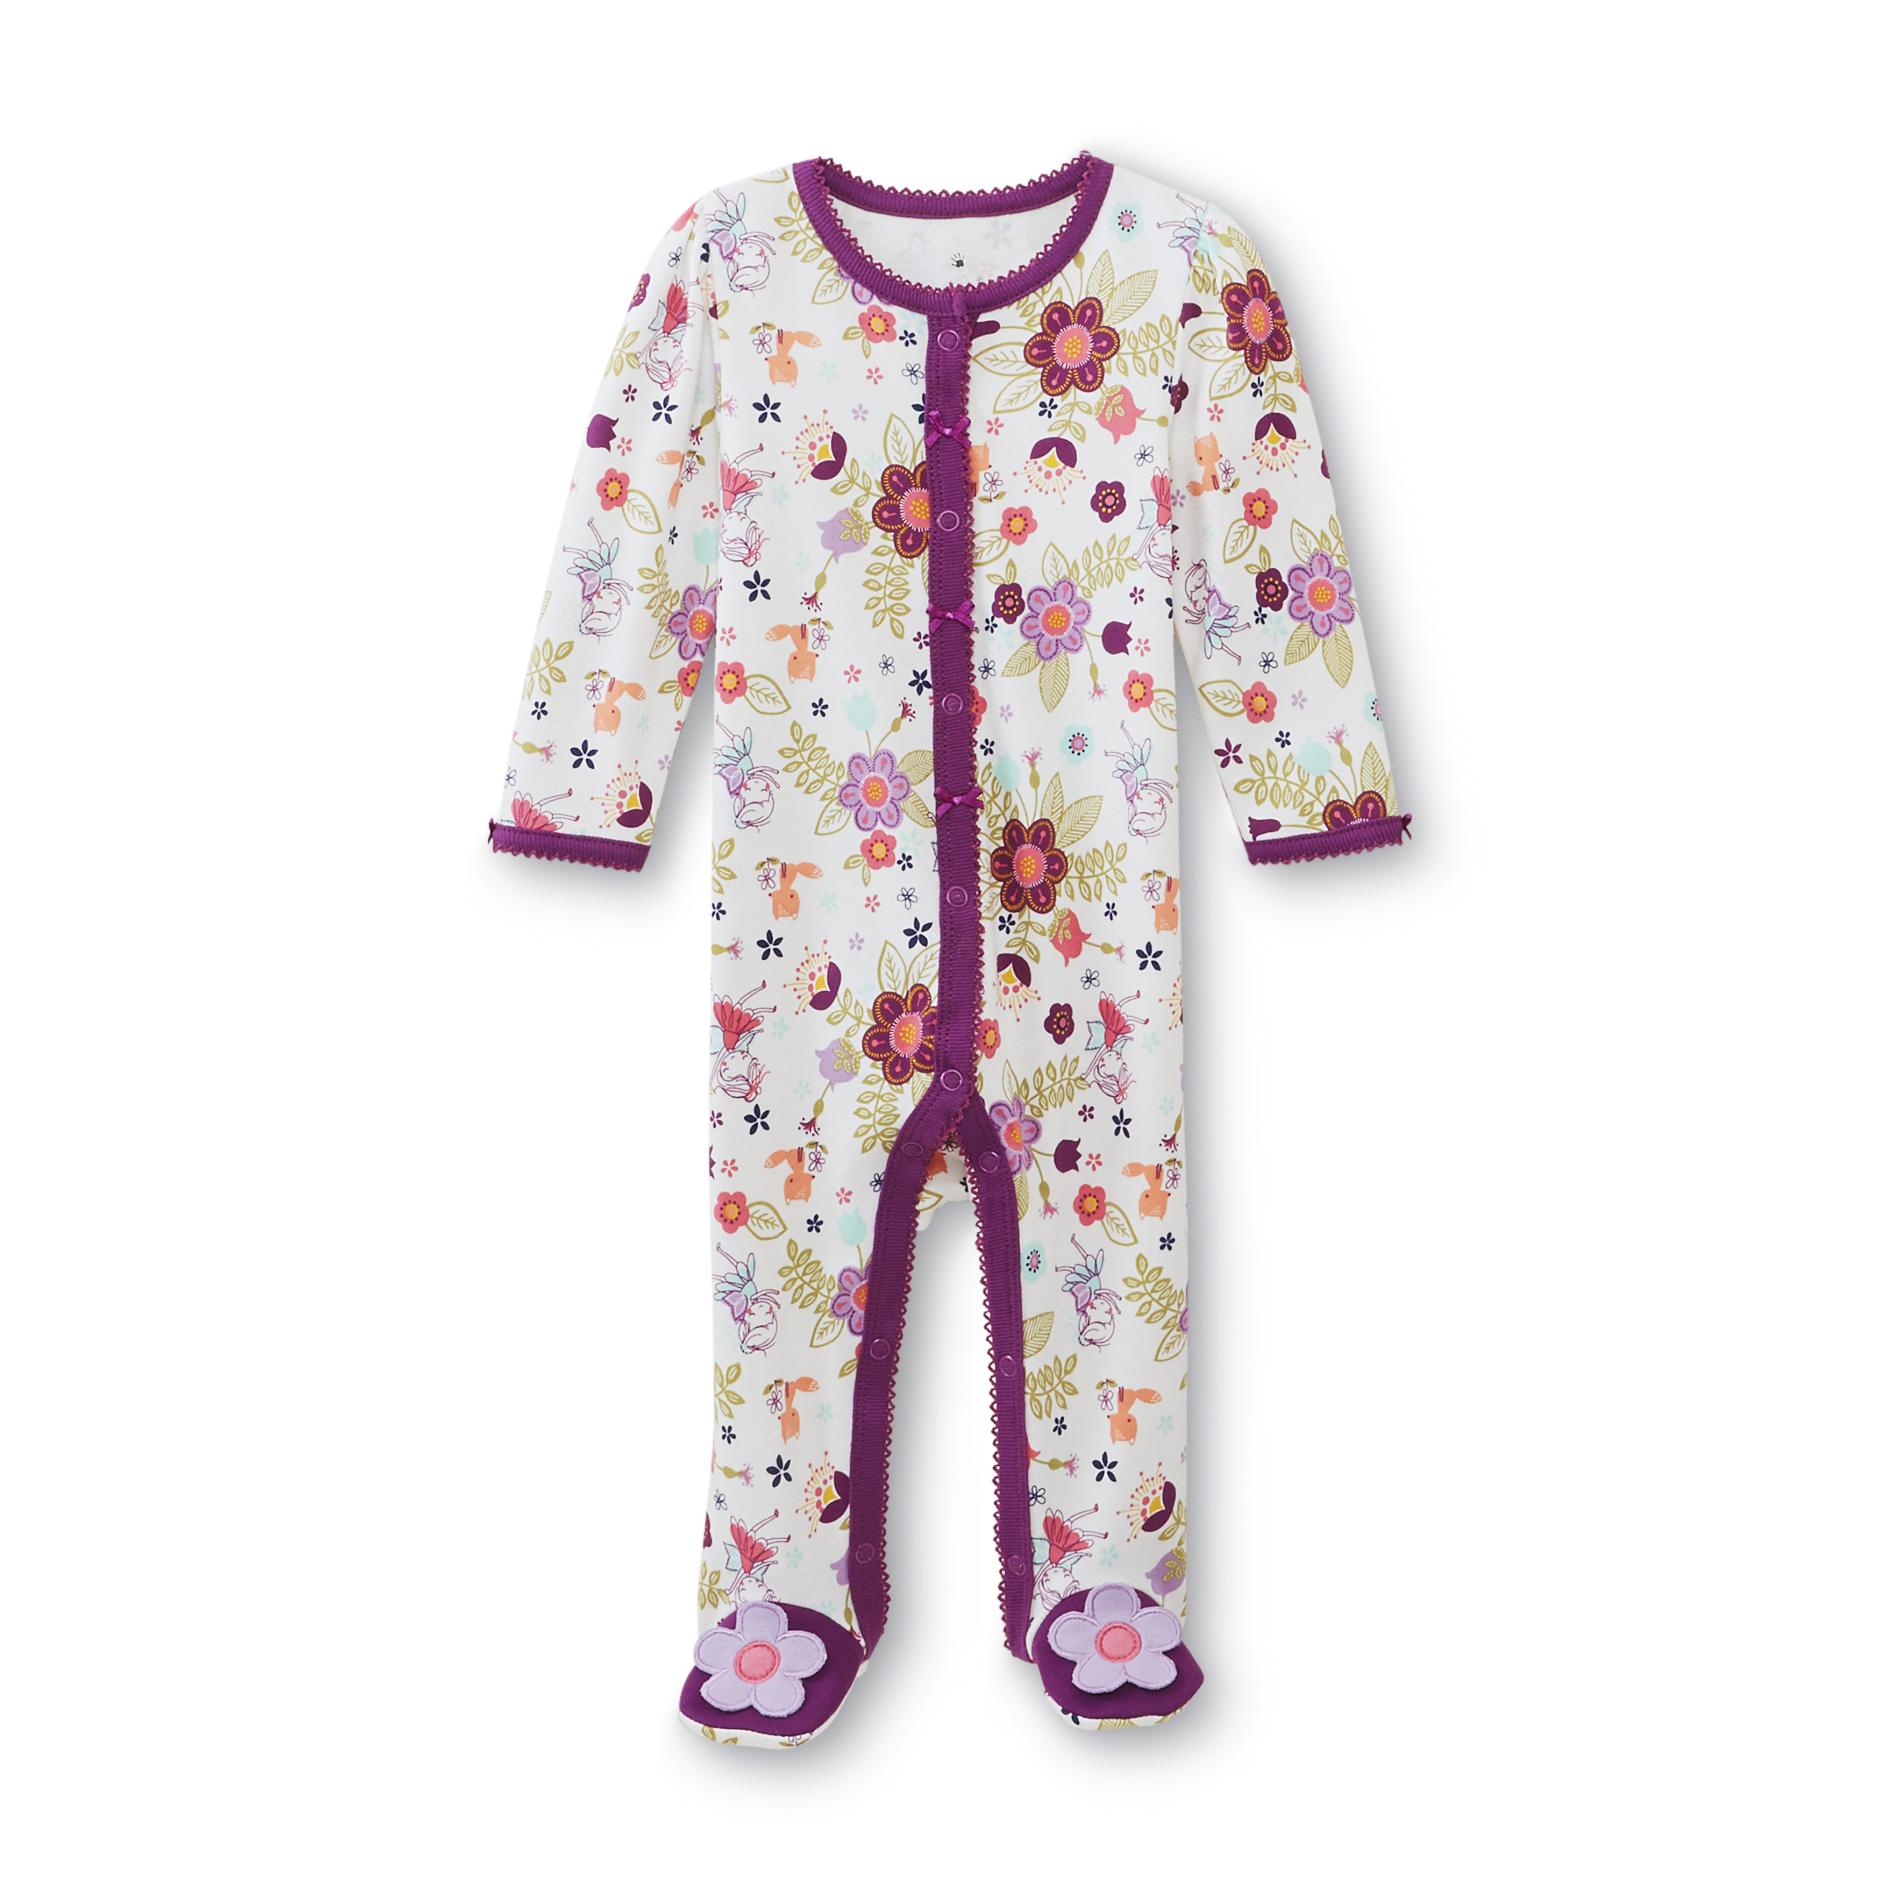 Small Wonders Newborn Girl's Footed Pajamas - Forest Fairies